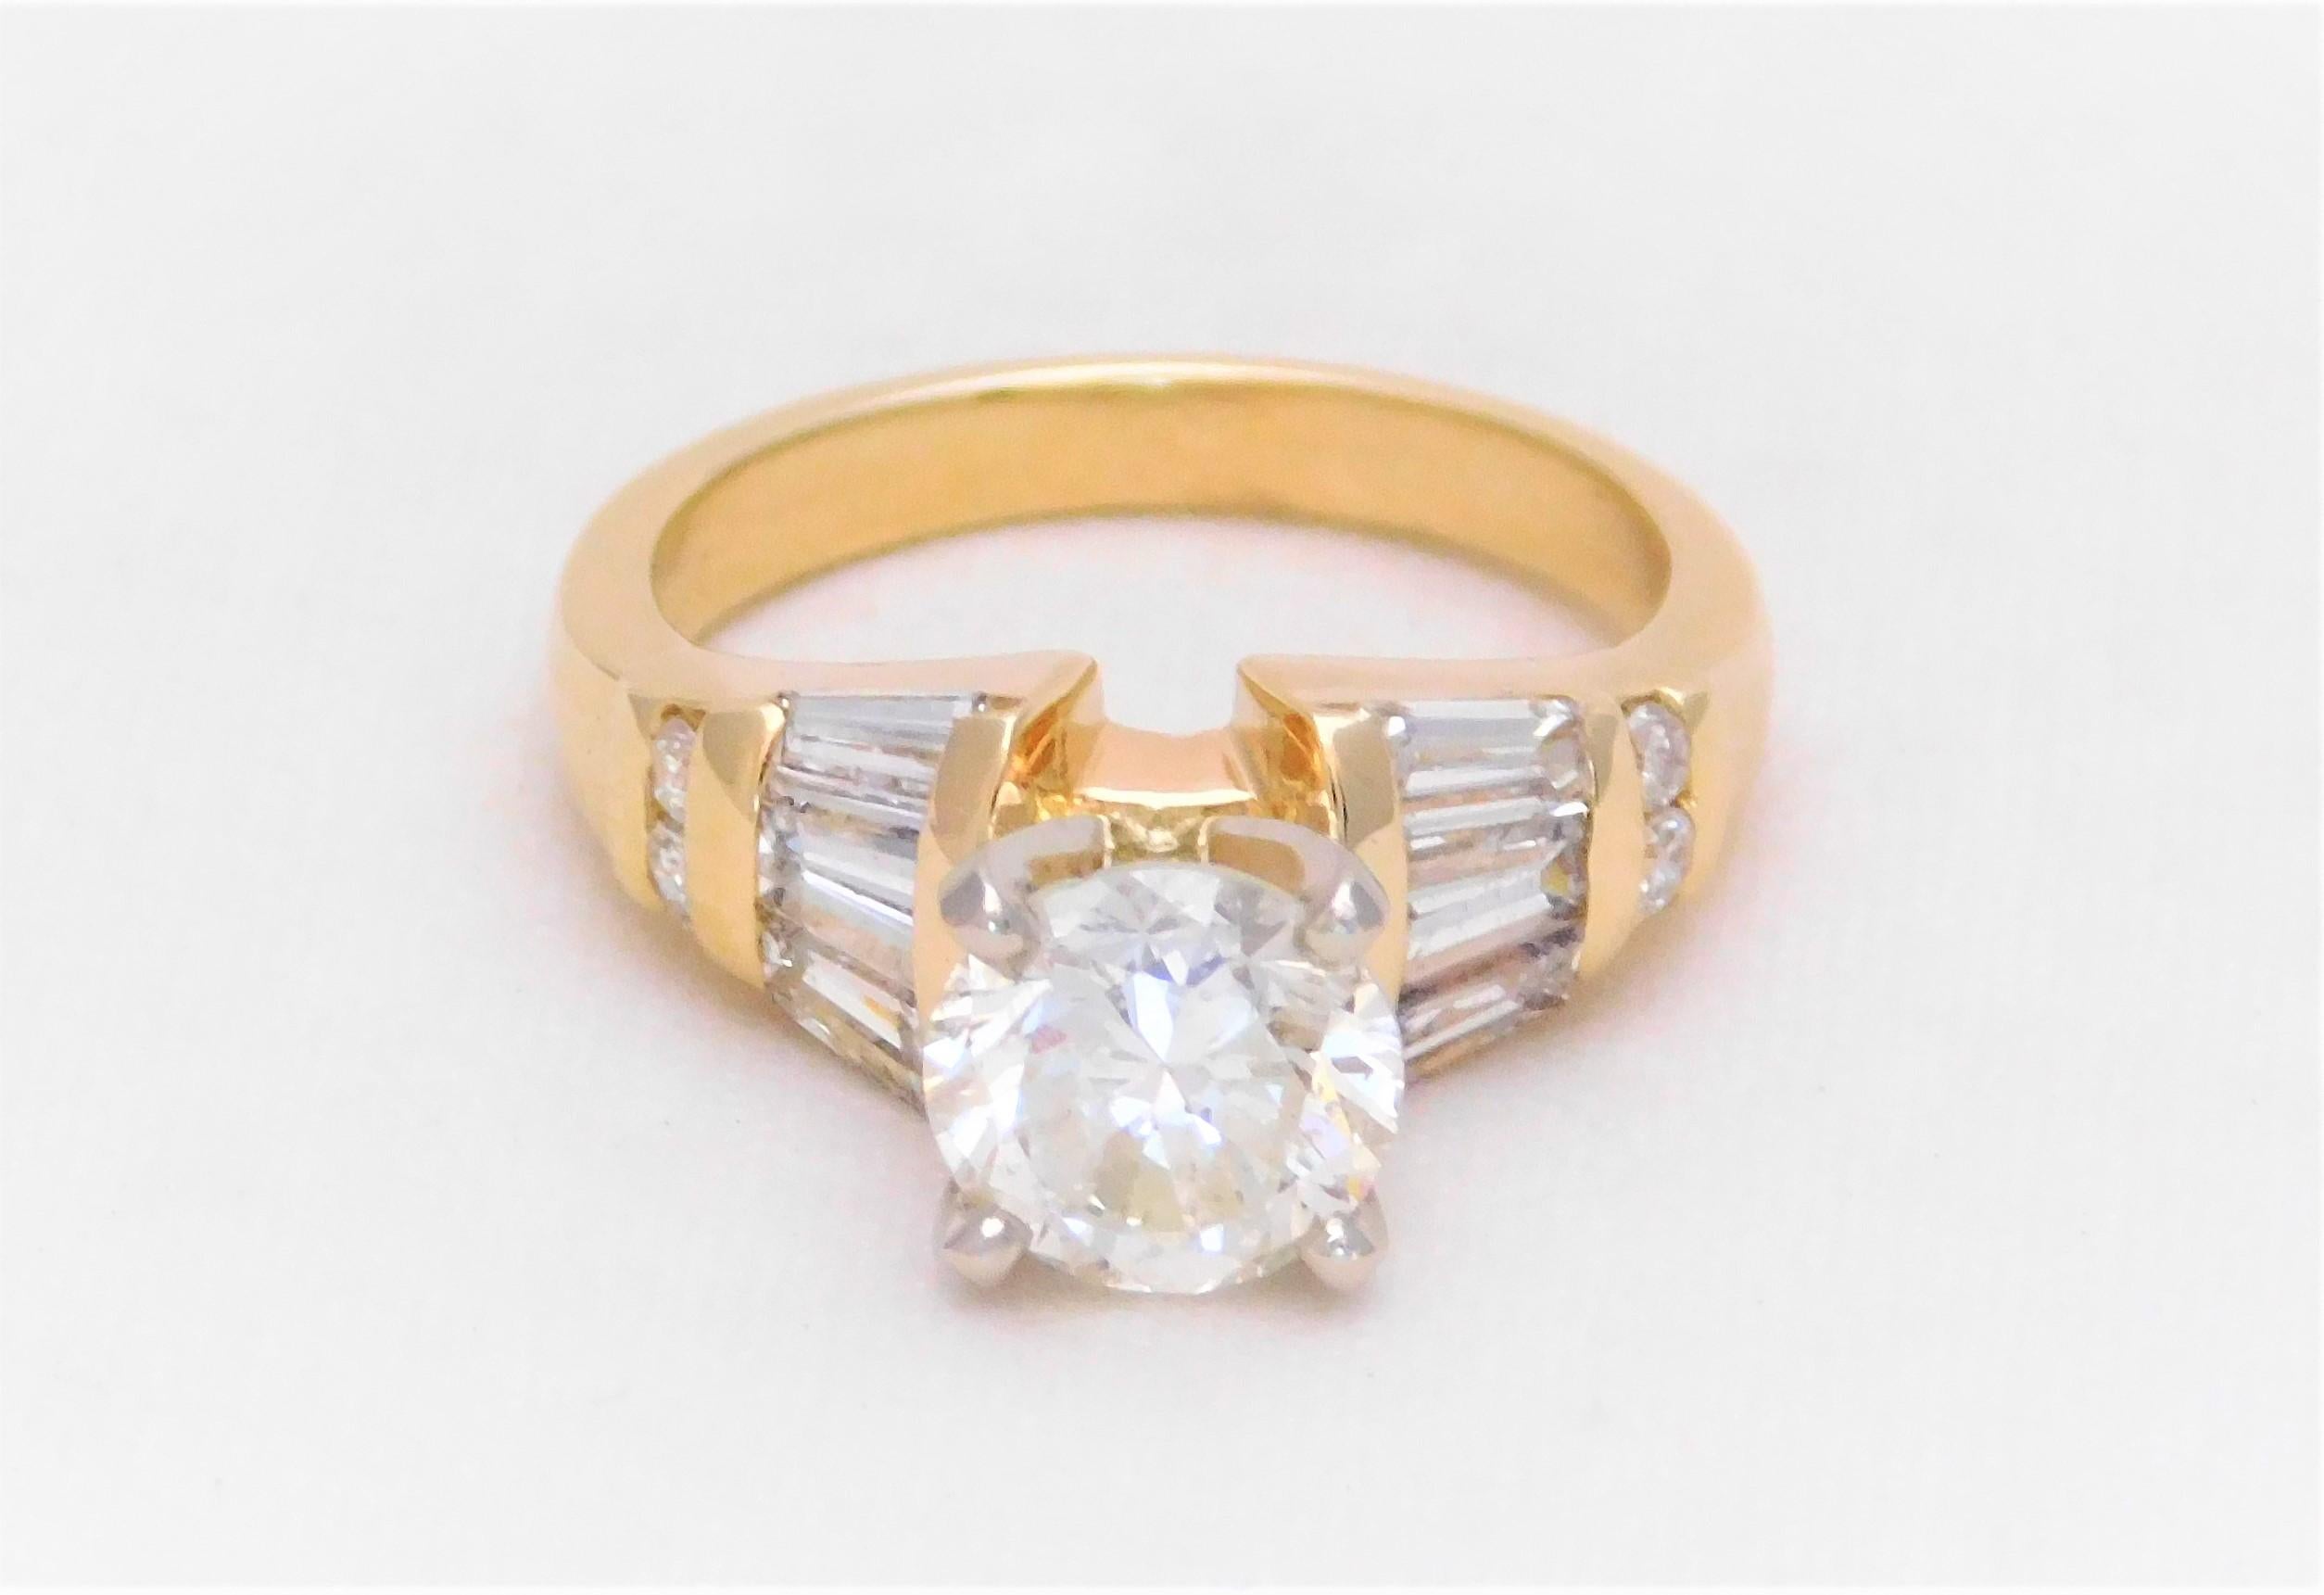 Vintage 2.12 Carat Diamond Engagement Ring In Excellent Condition For Sale In Metairie, LA